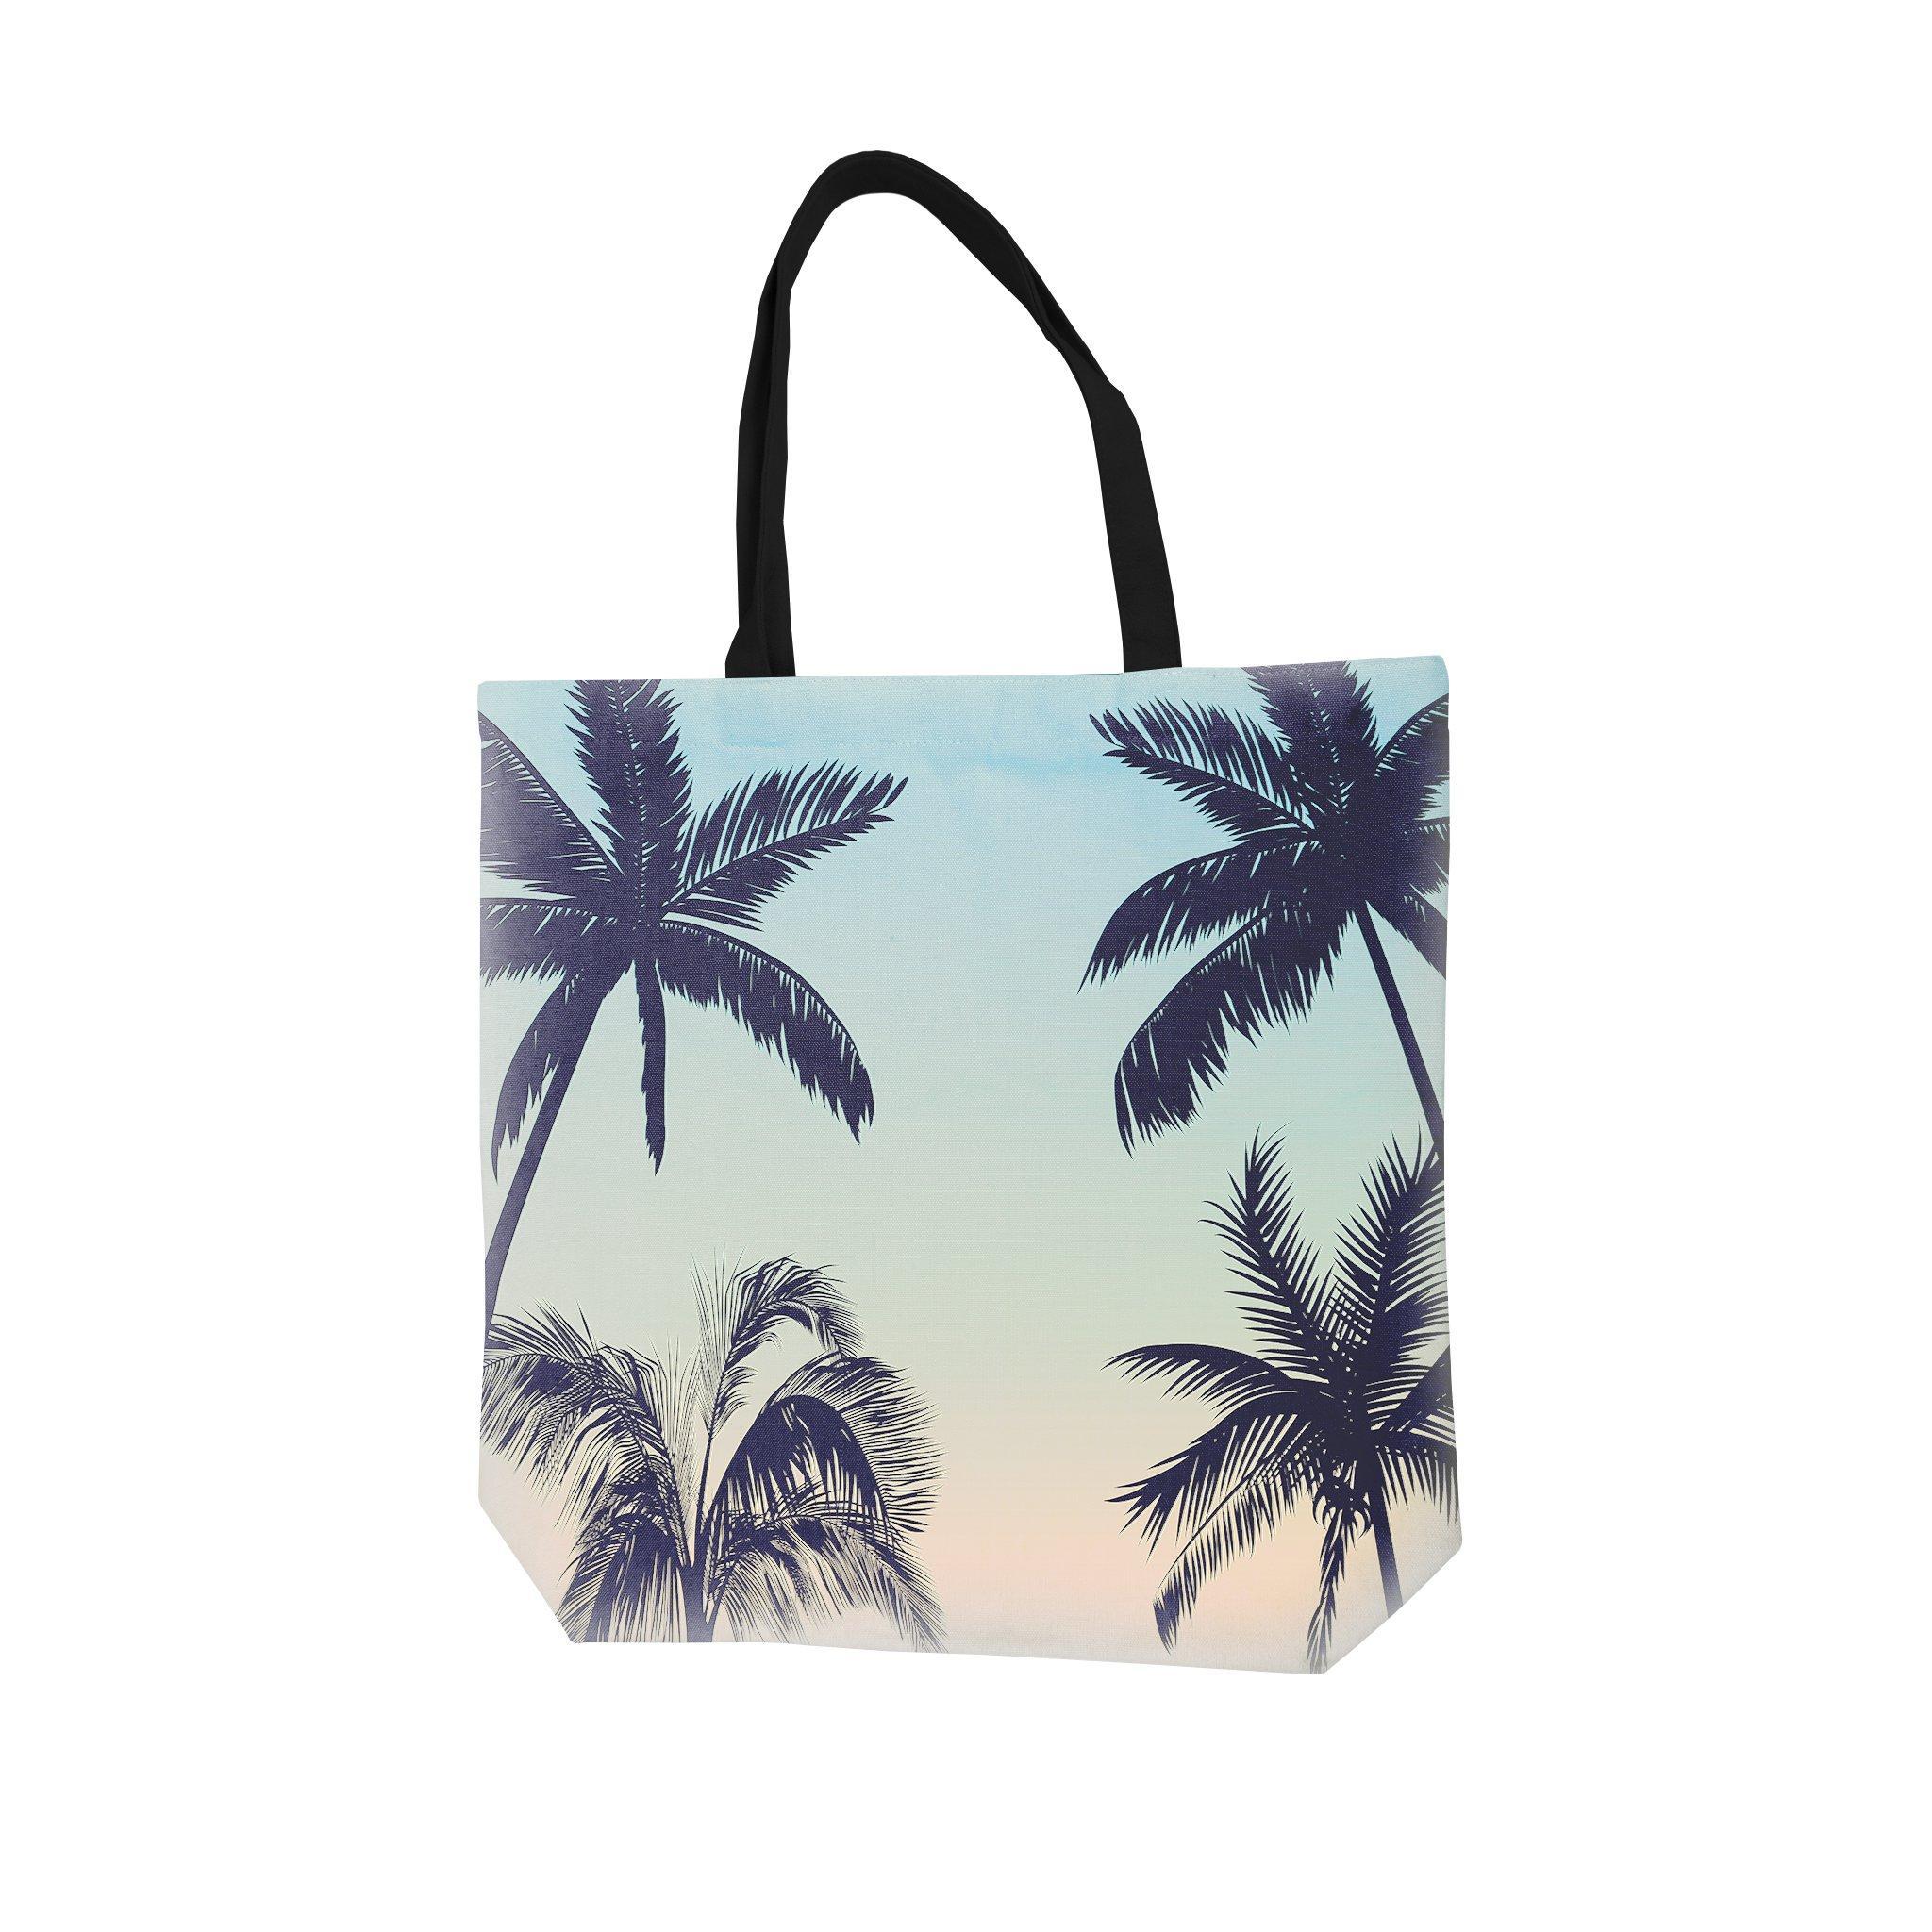 Sublimation Tote Bag white with Black Handles, 100% Polyester, 16wx16 H, 1  each